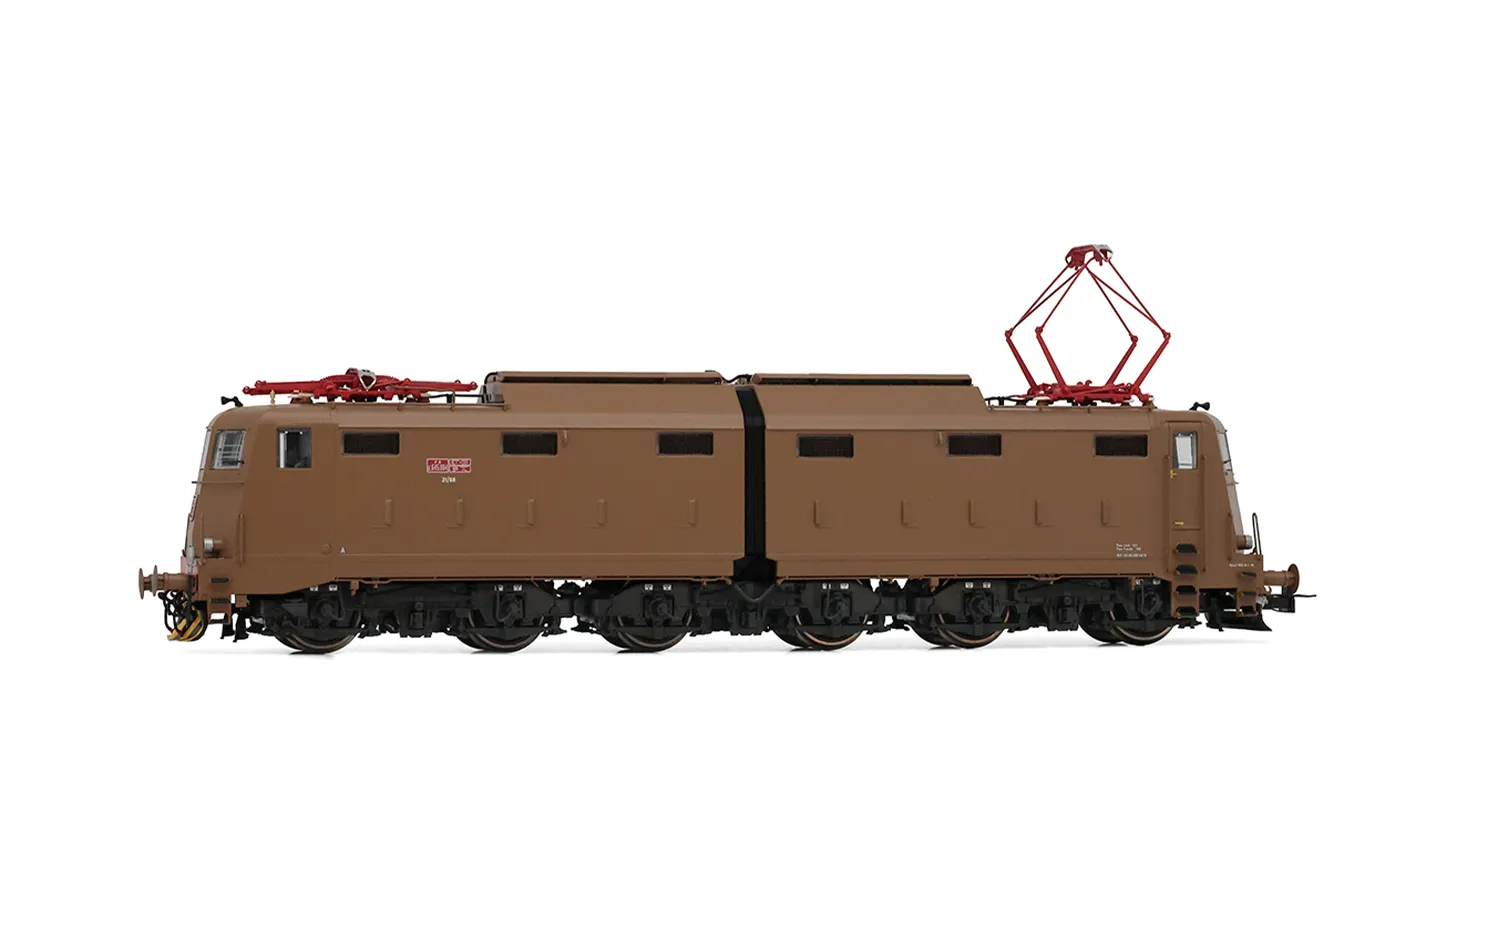 FS, 6-axle electric locomotive E.645 1st series, isabella livery, simplified FS logo red, pantographs 52, ep. V